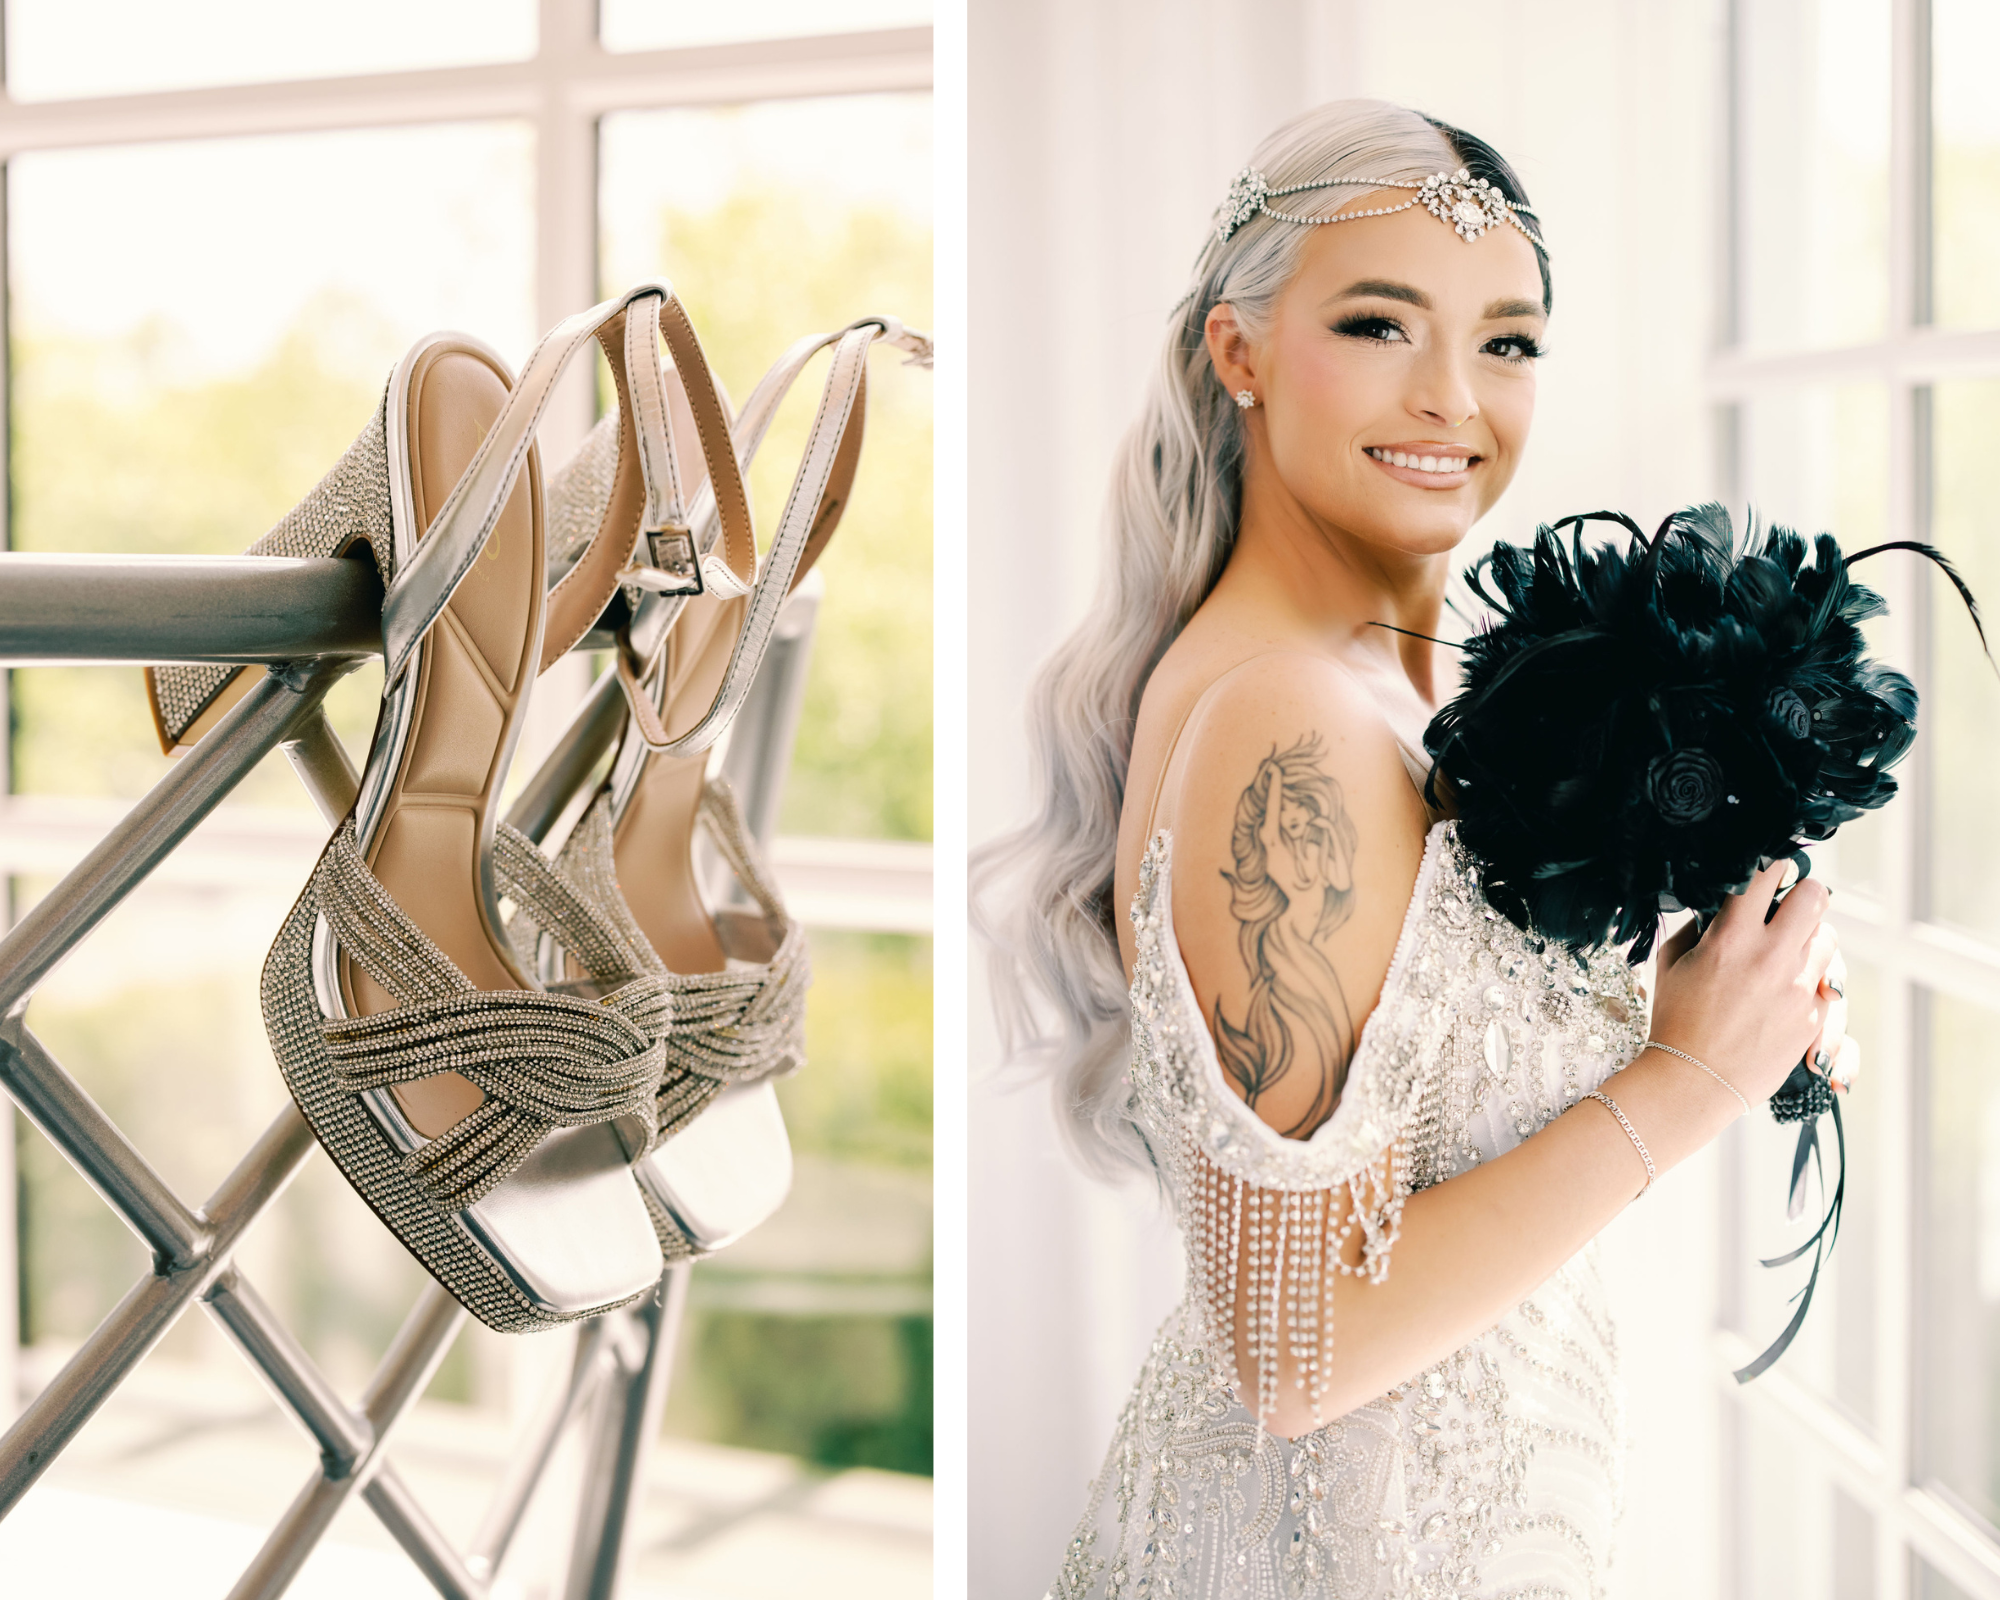 Fabulous 1920s-inspired bride with black and white hair. She's wearing a Swarovski-crystal bridal halo headpiece and beaded gown.